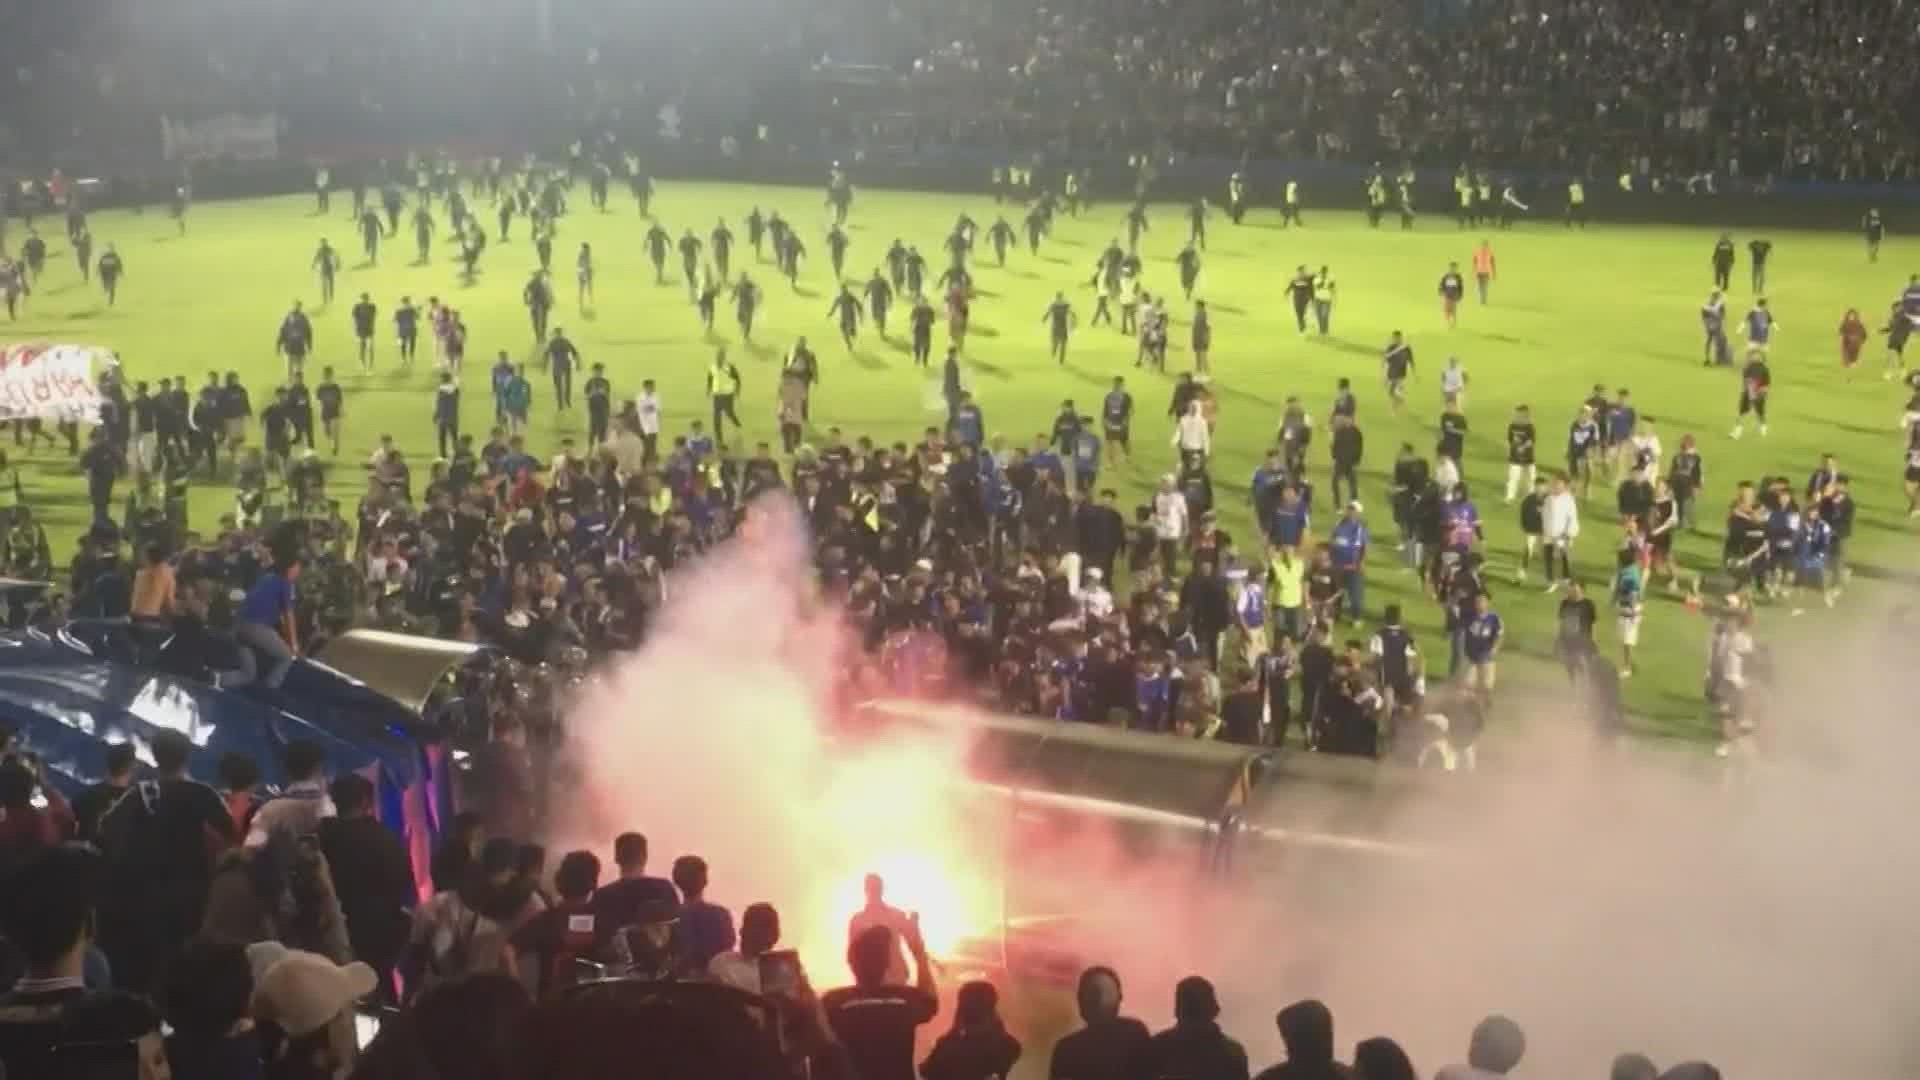 125 people were killed a soccer tragedy in Indonesia when fans rushed the field after the game. The incident is being investigated.